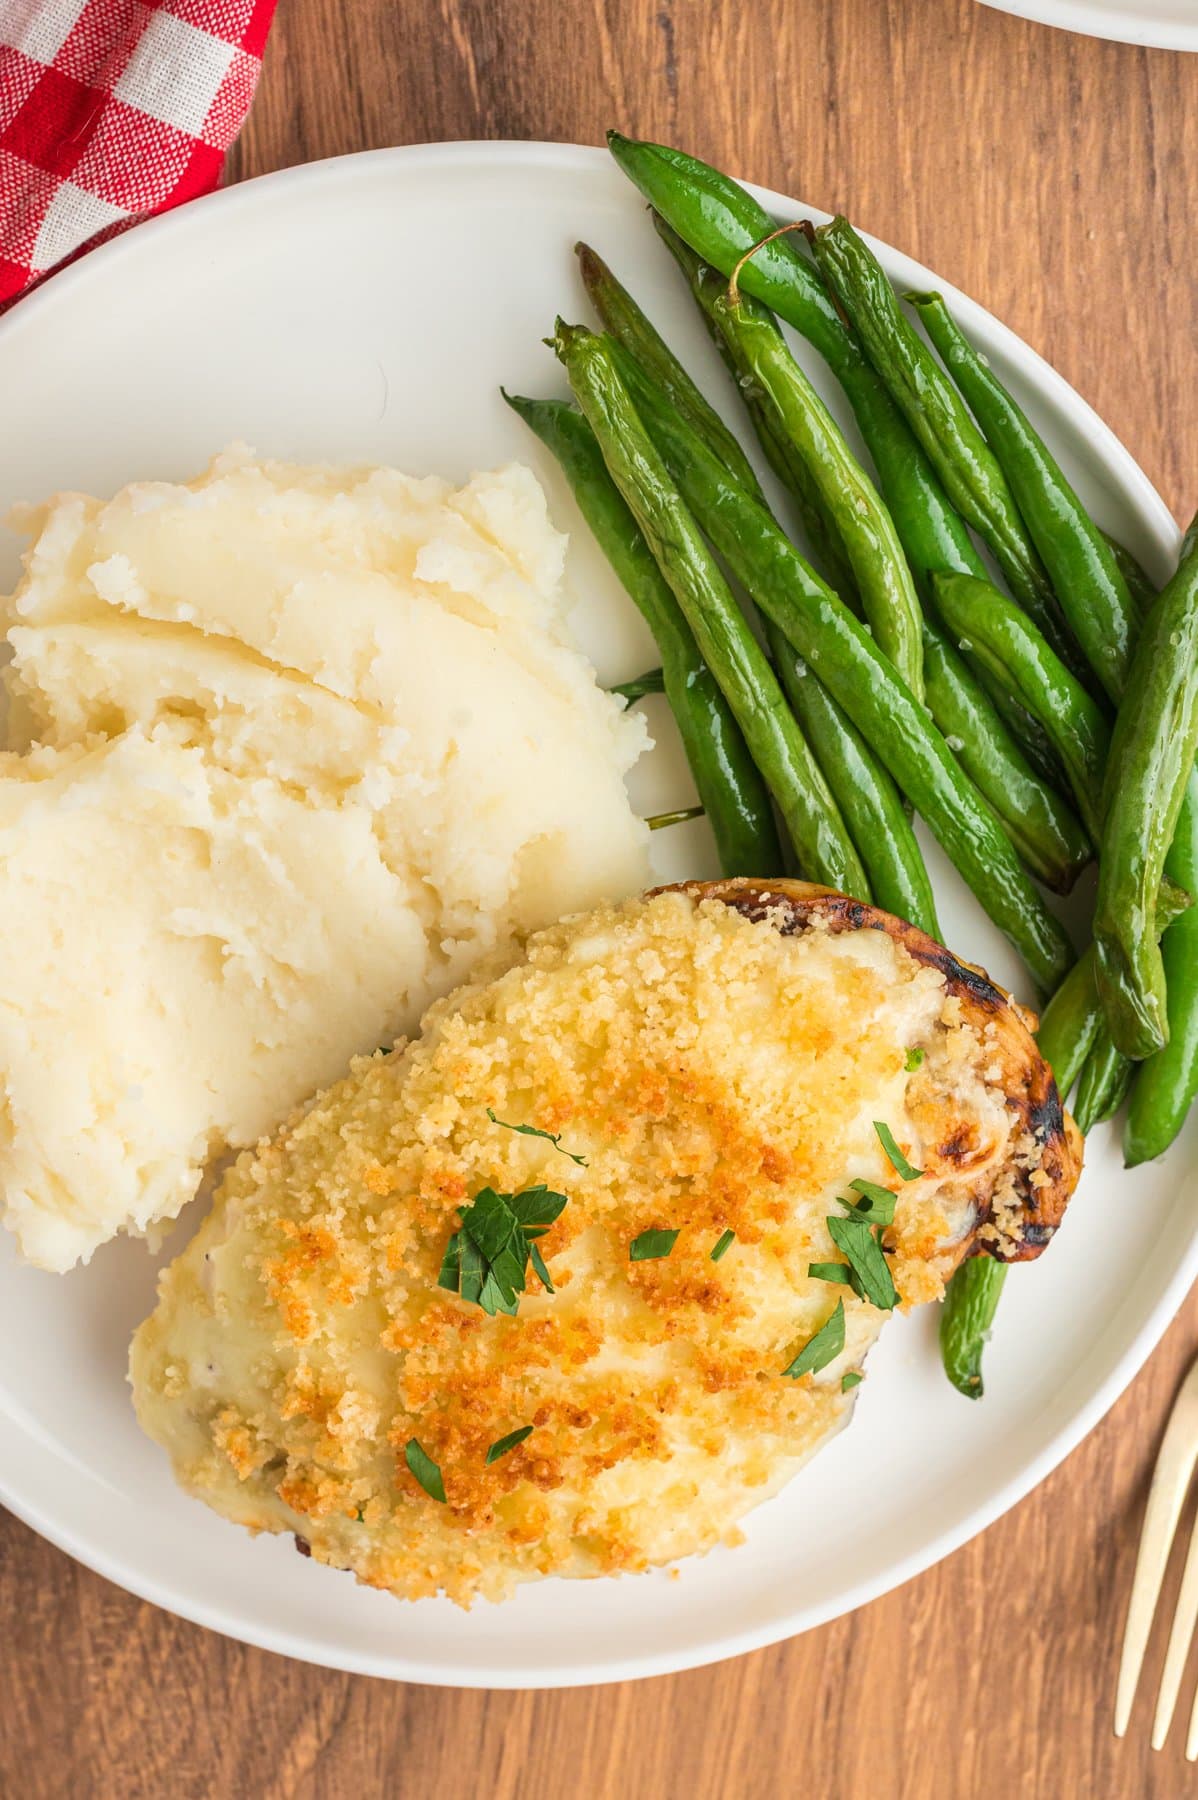 Parmesan crusted chicken on a plate with mashed potatoes and green beans